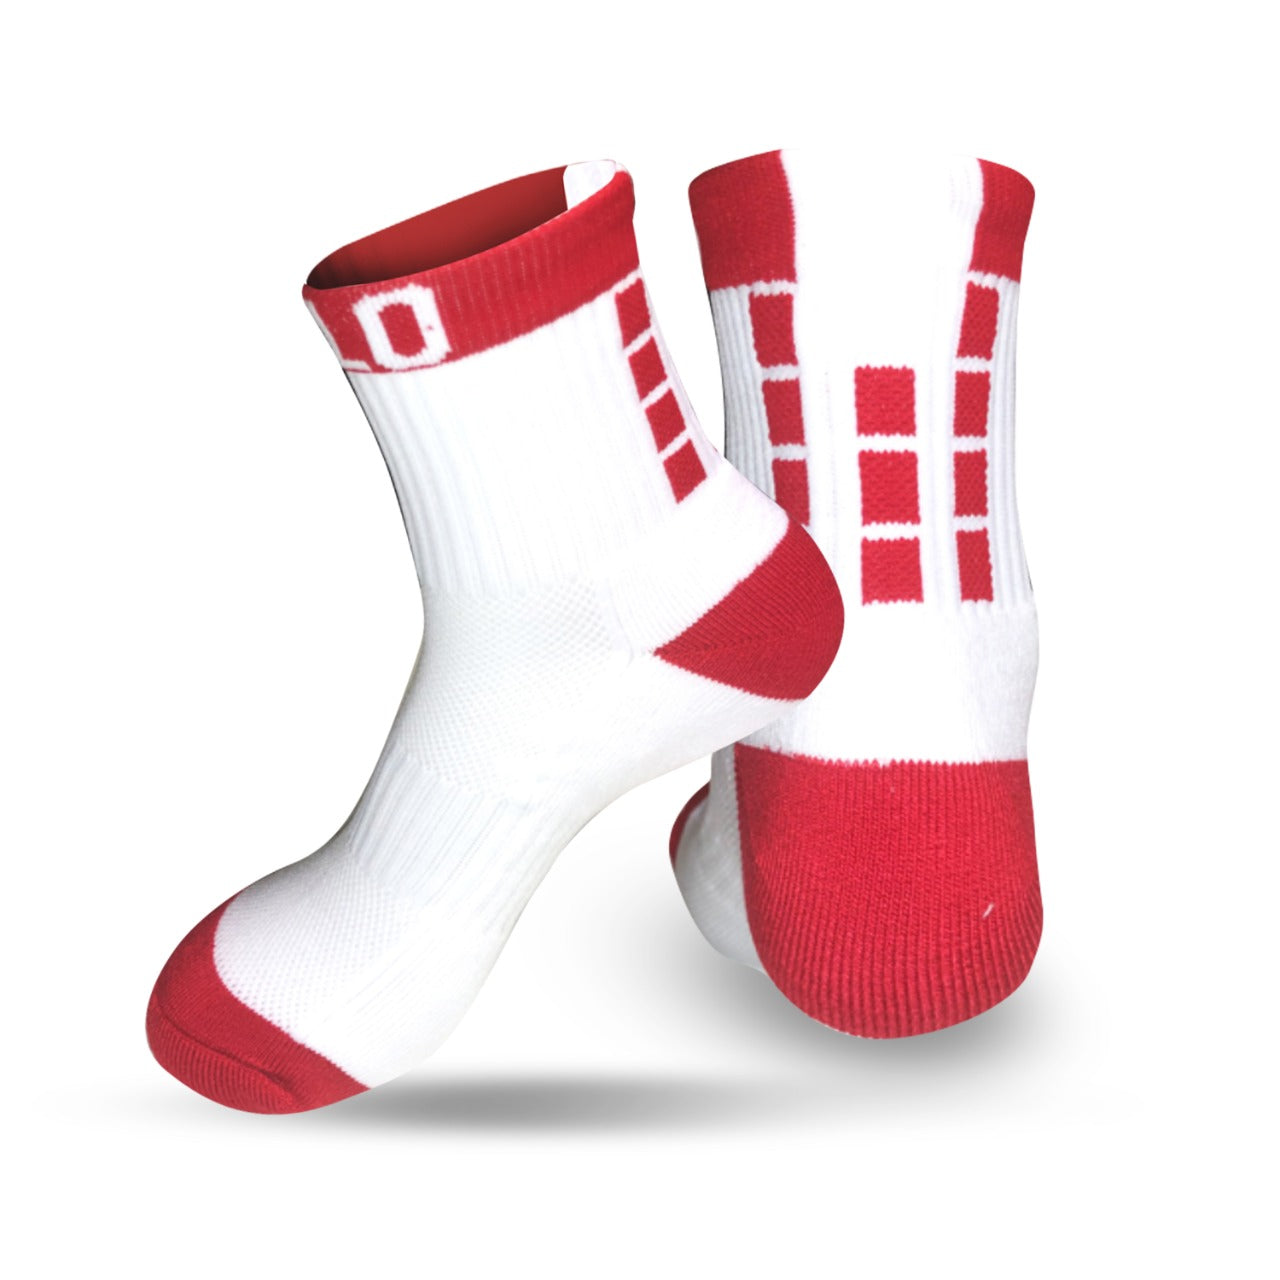 Lowrise Cushioned Ankle Socks - Red & White